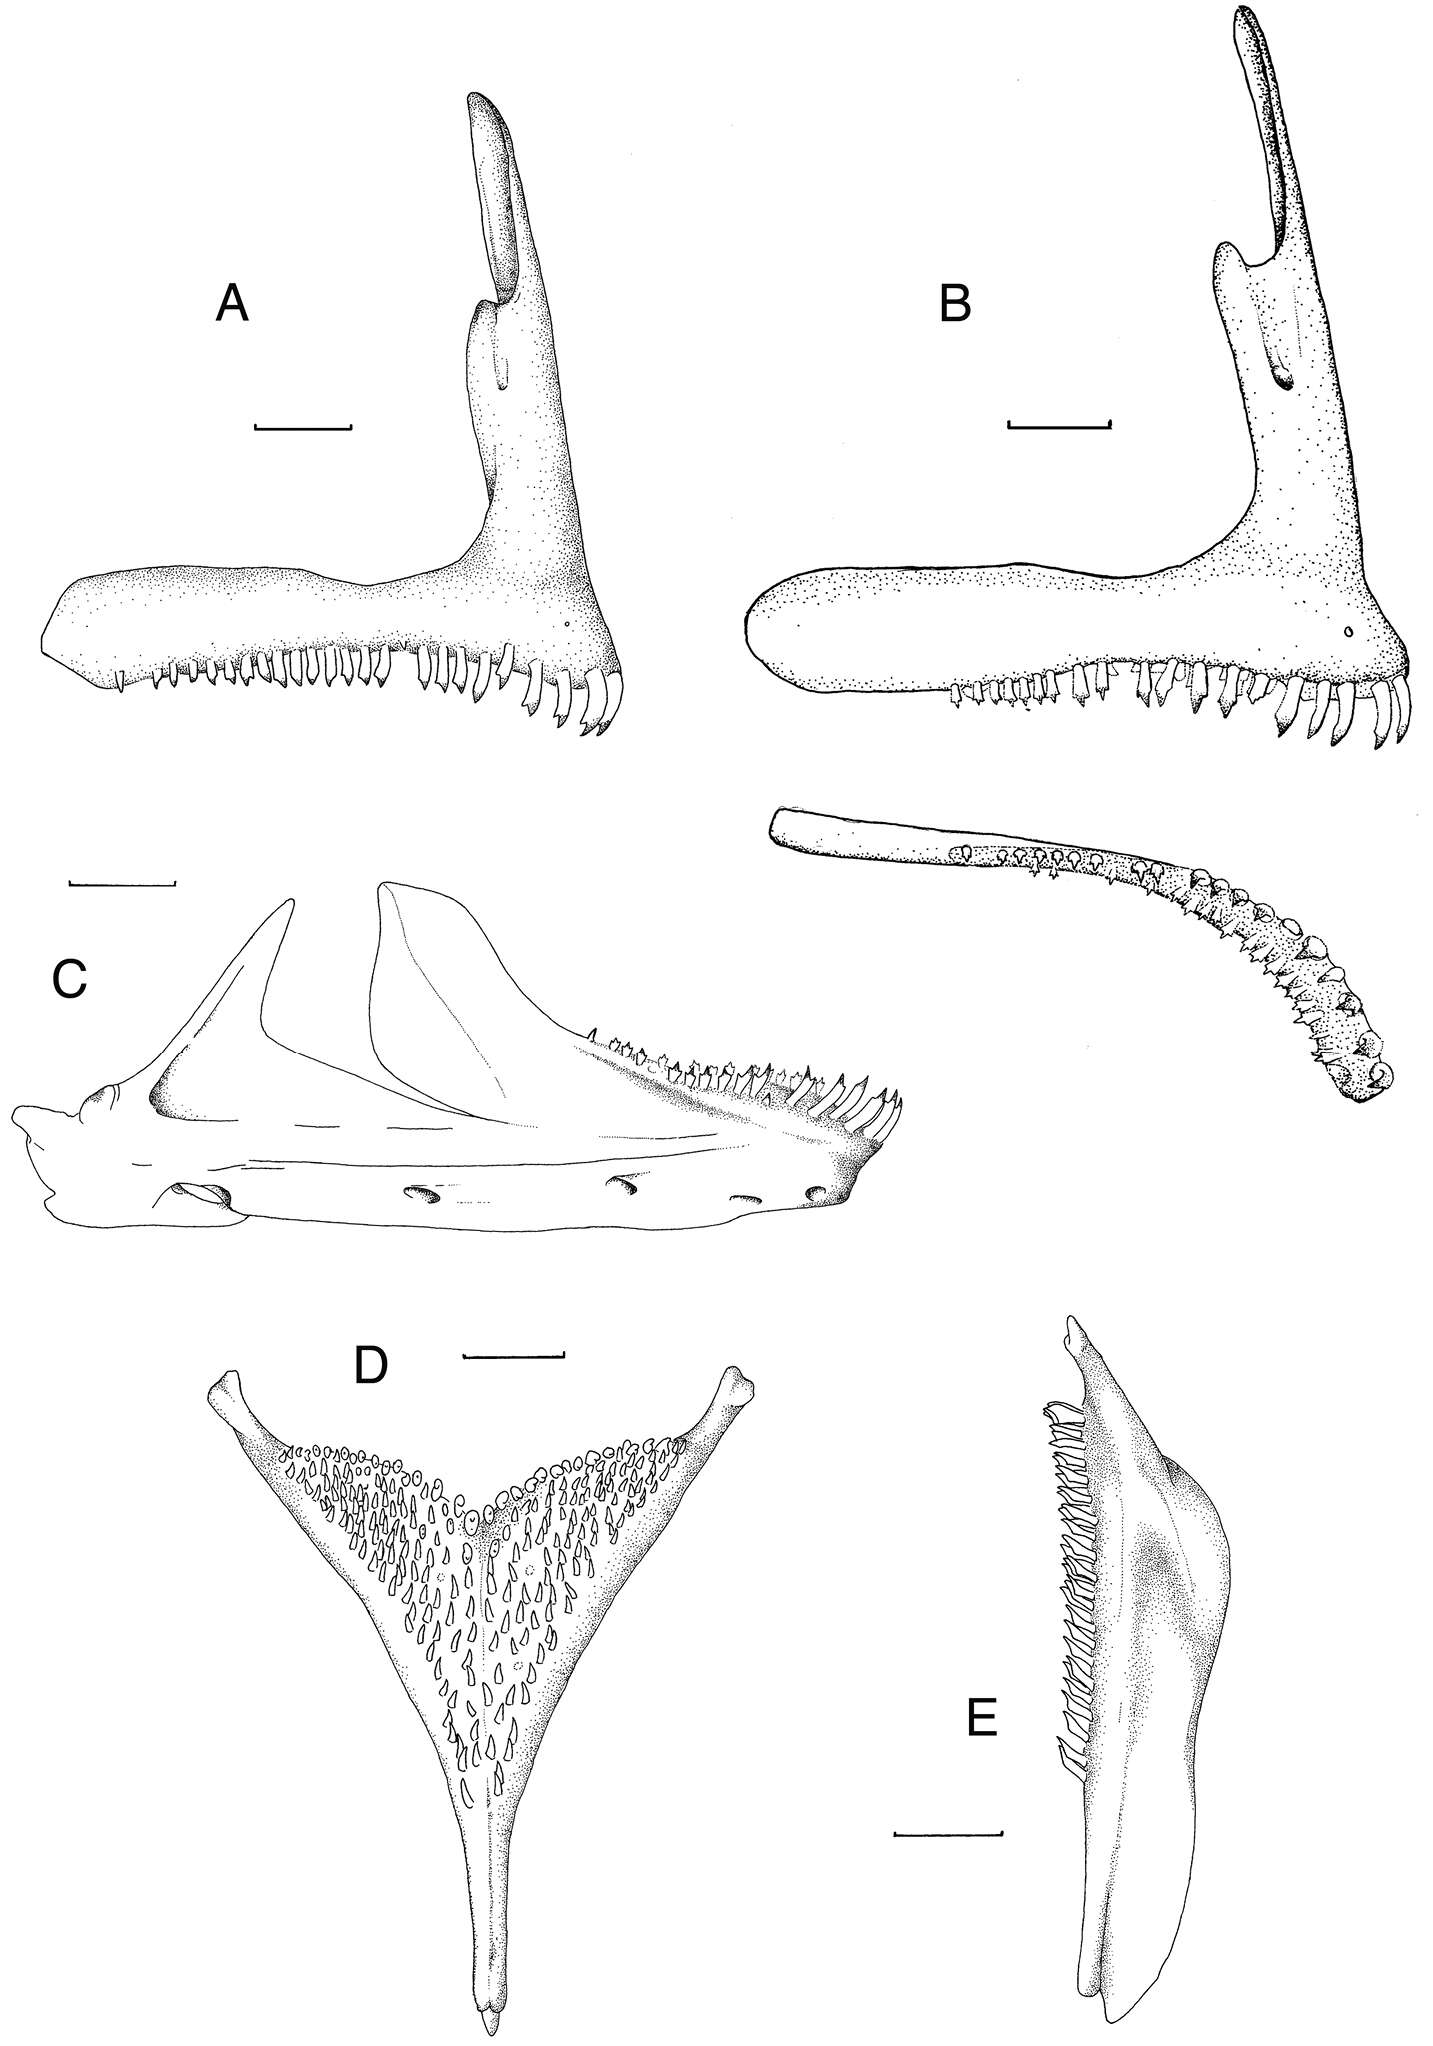 Image of Mouth-brooders